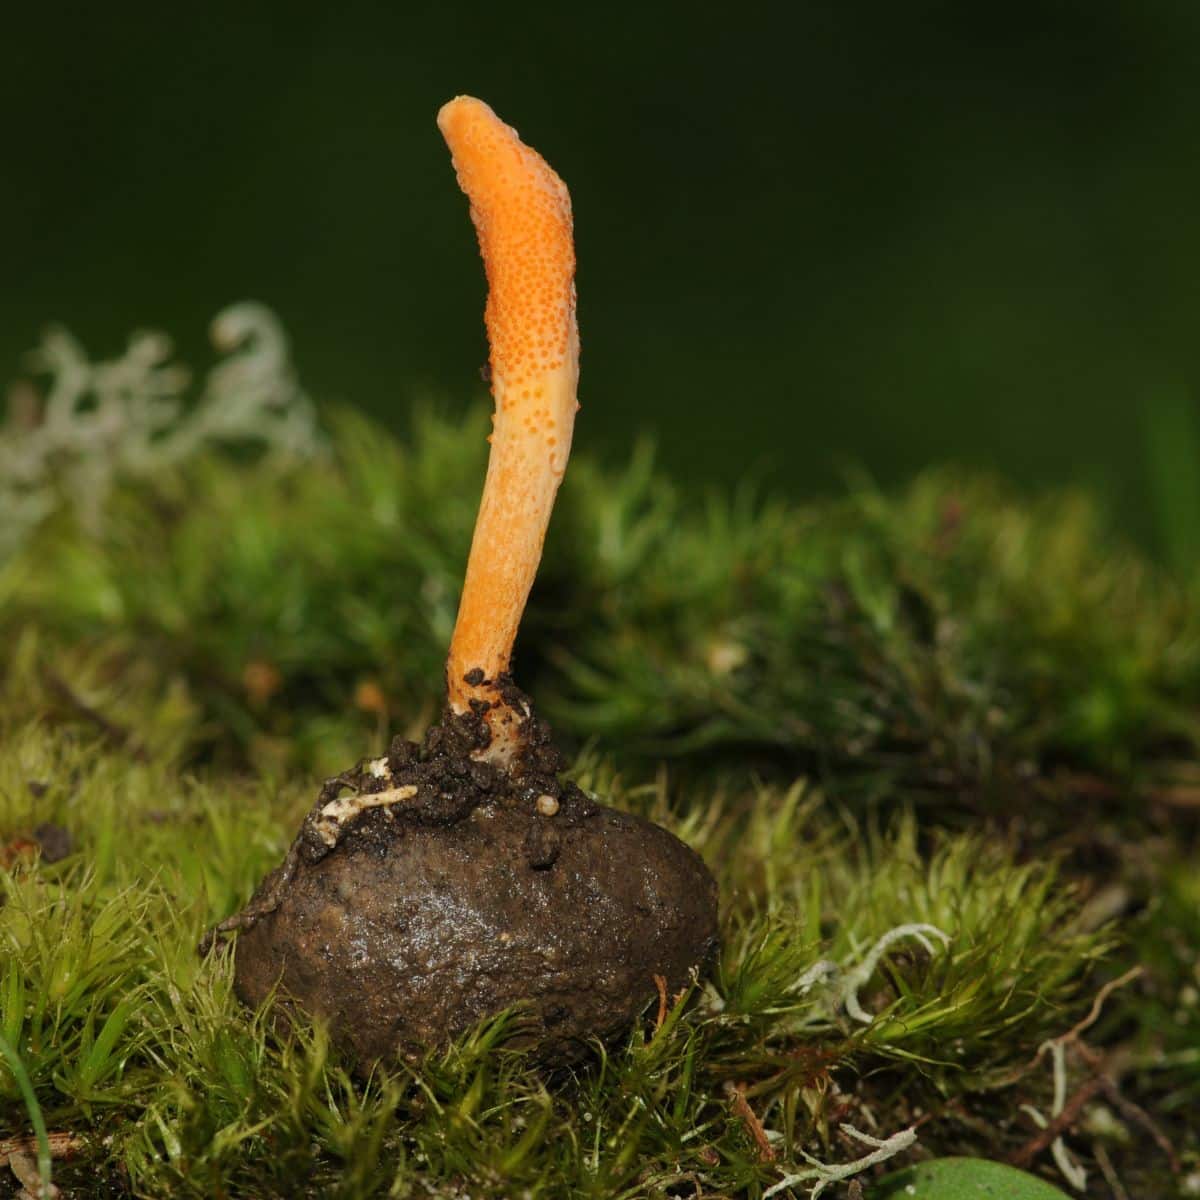 Cordyceps militaris erupting from a butterfly cocoon